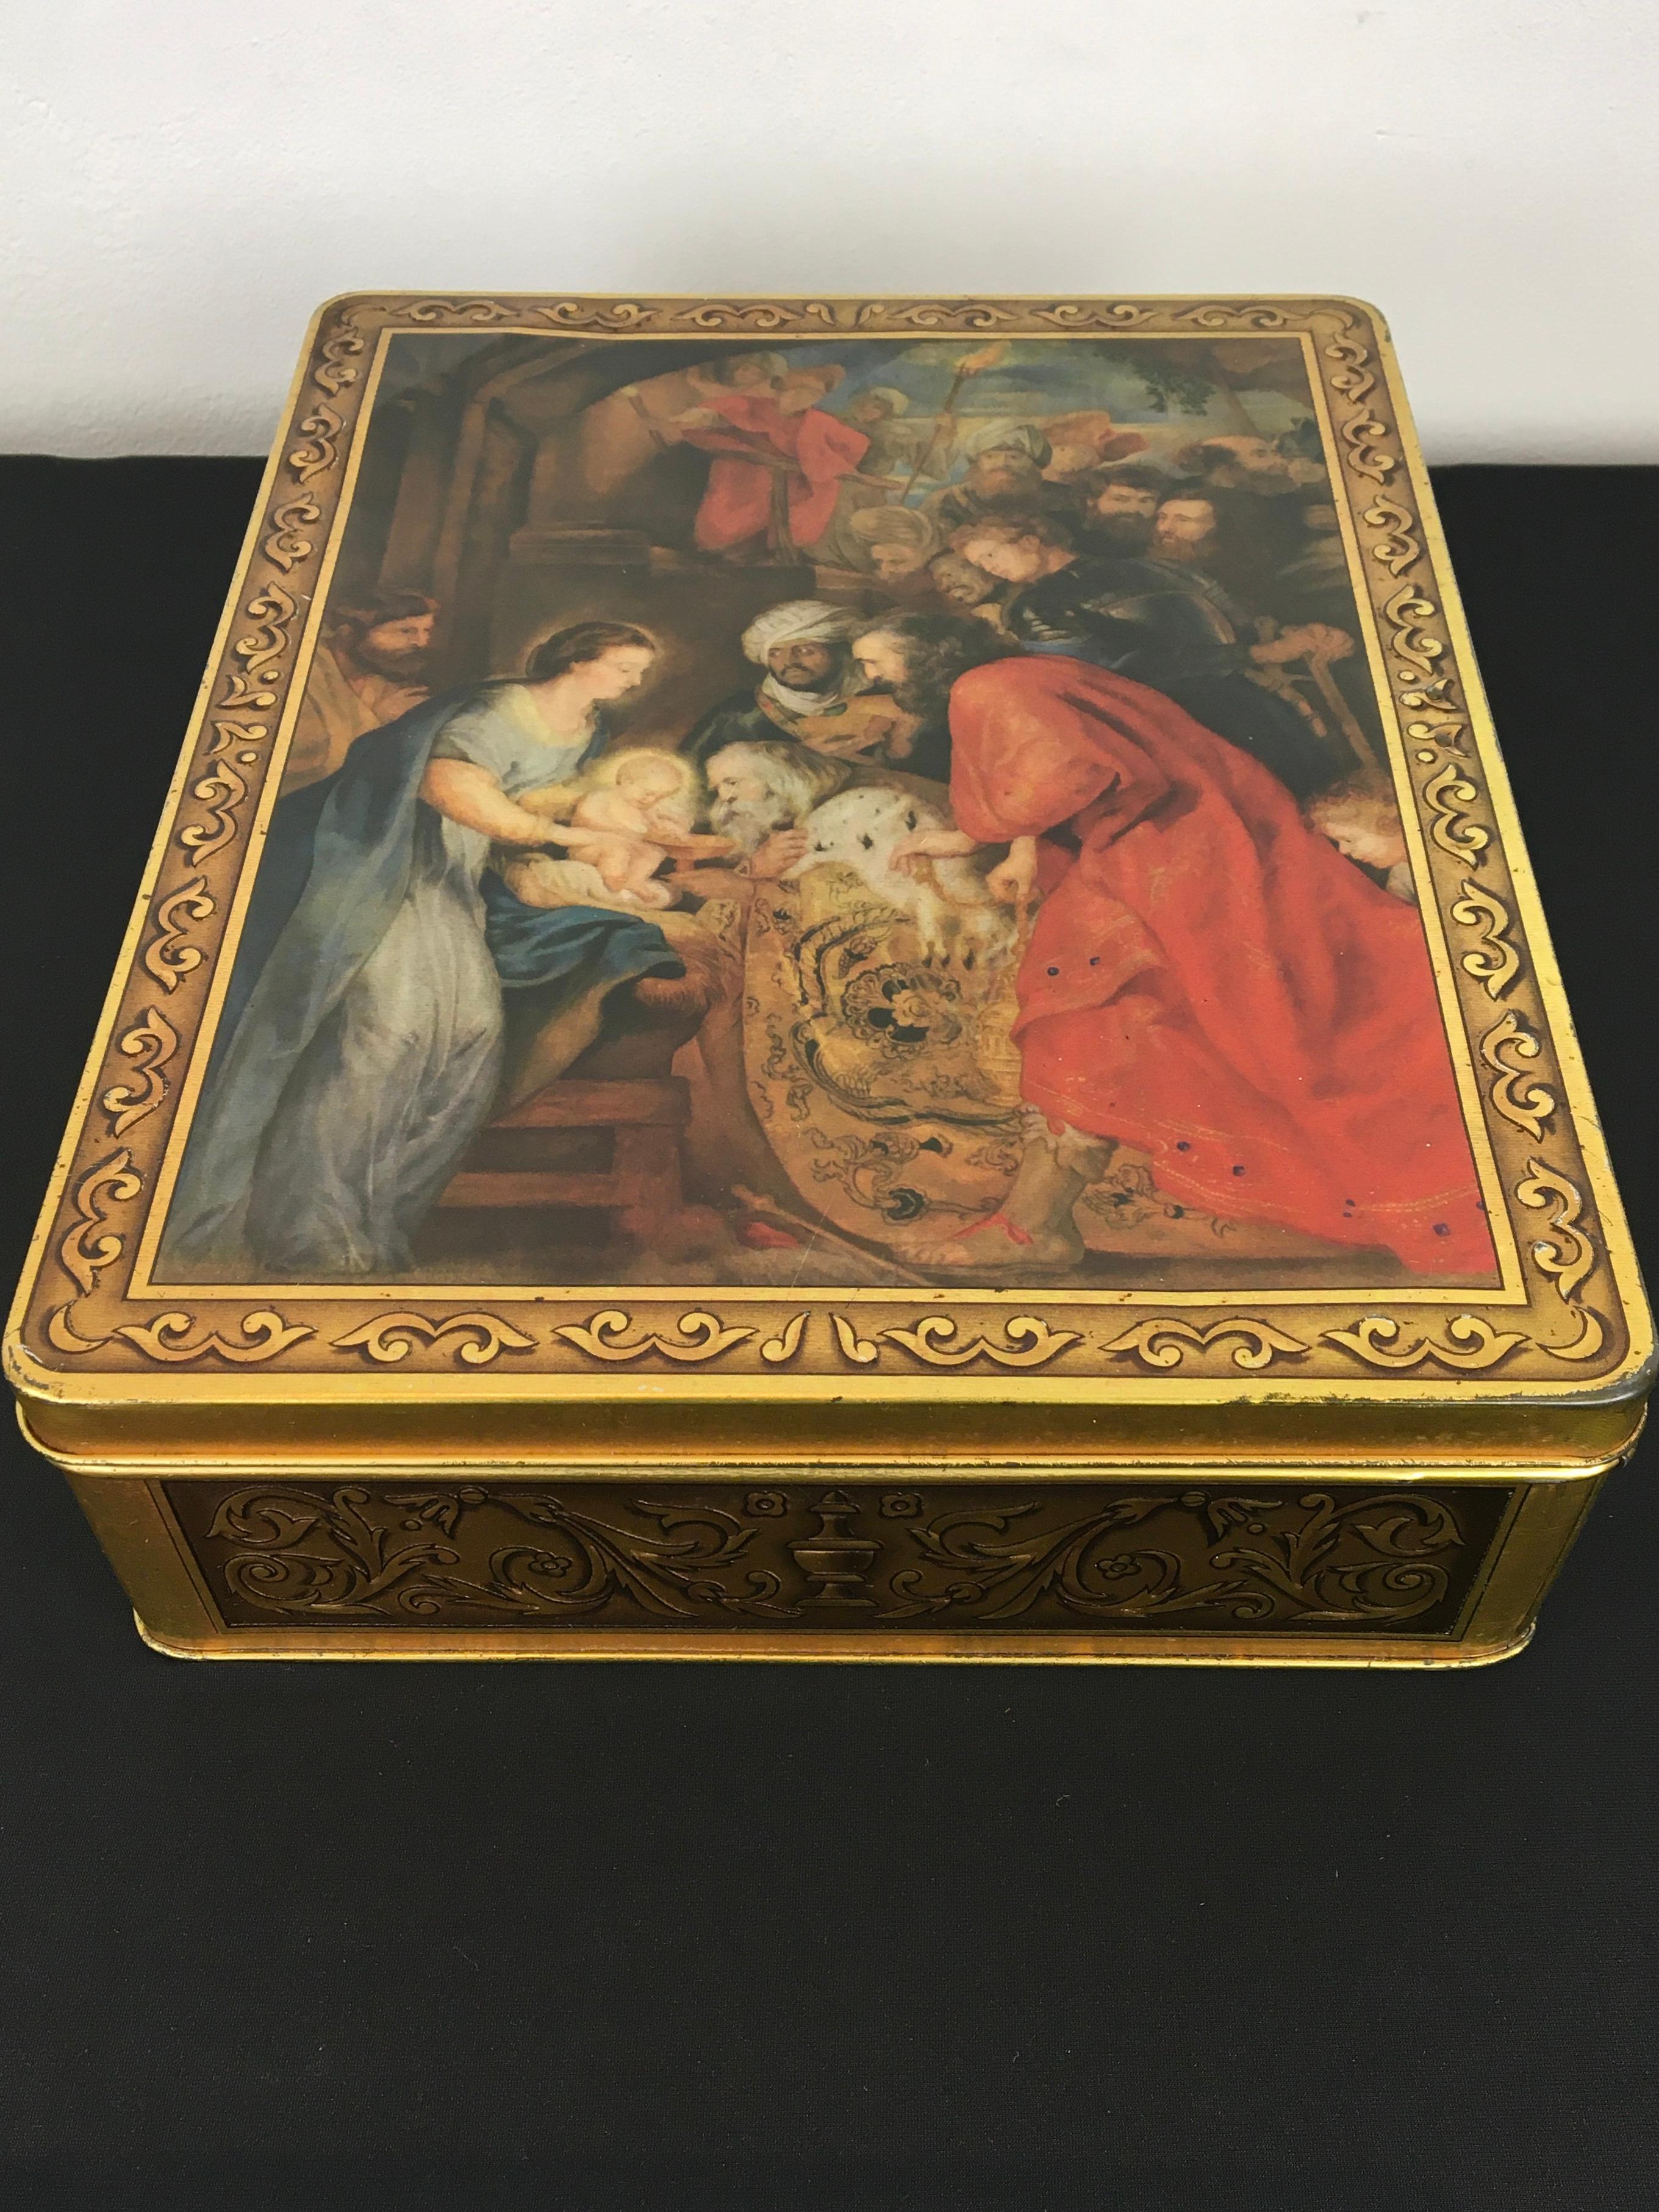 P.P Rubens - Peter Paul Rubens - Adoration of the Magi 
A Tin box for De Beukelaer Antwerp - Antwerp Biscuit Factory. 
This rectangular tin looks like a framed Rubens painting. 
Rubens was known as a Flemish barok painter who lived in Antwerp. 

The